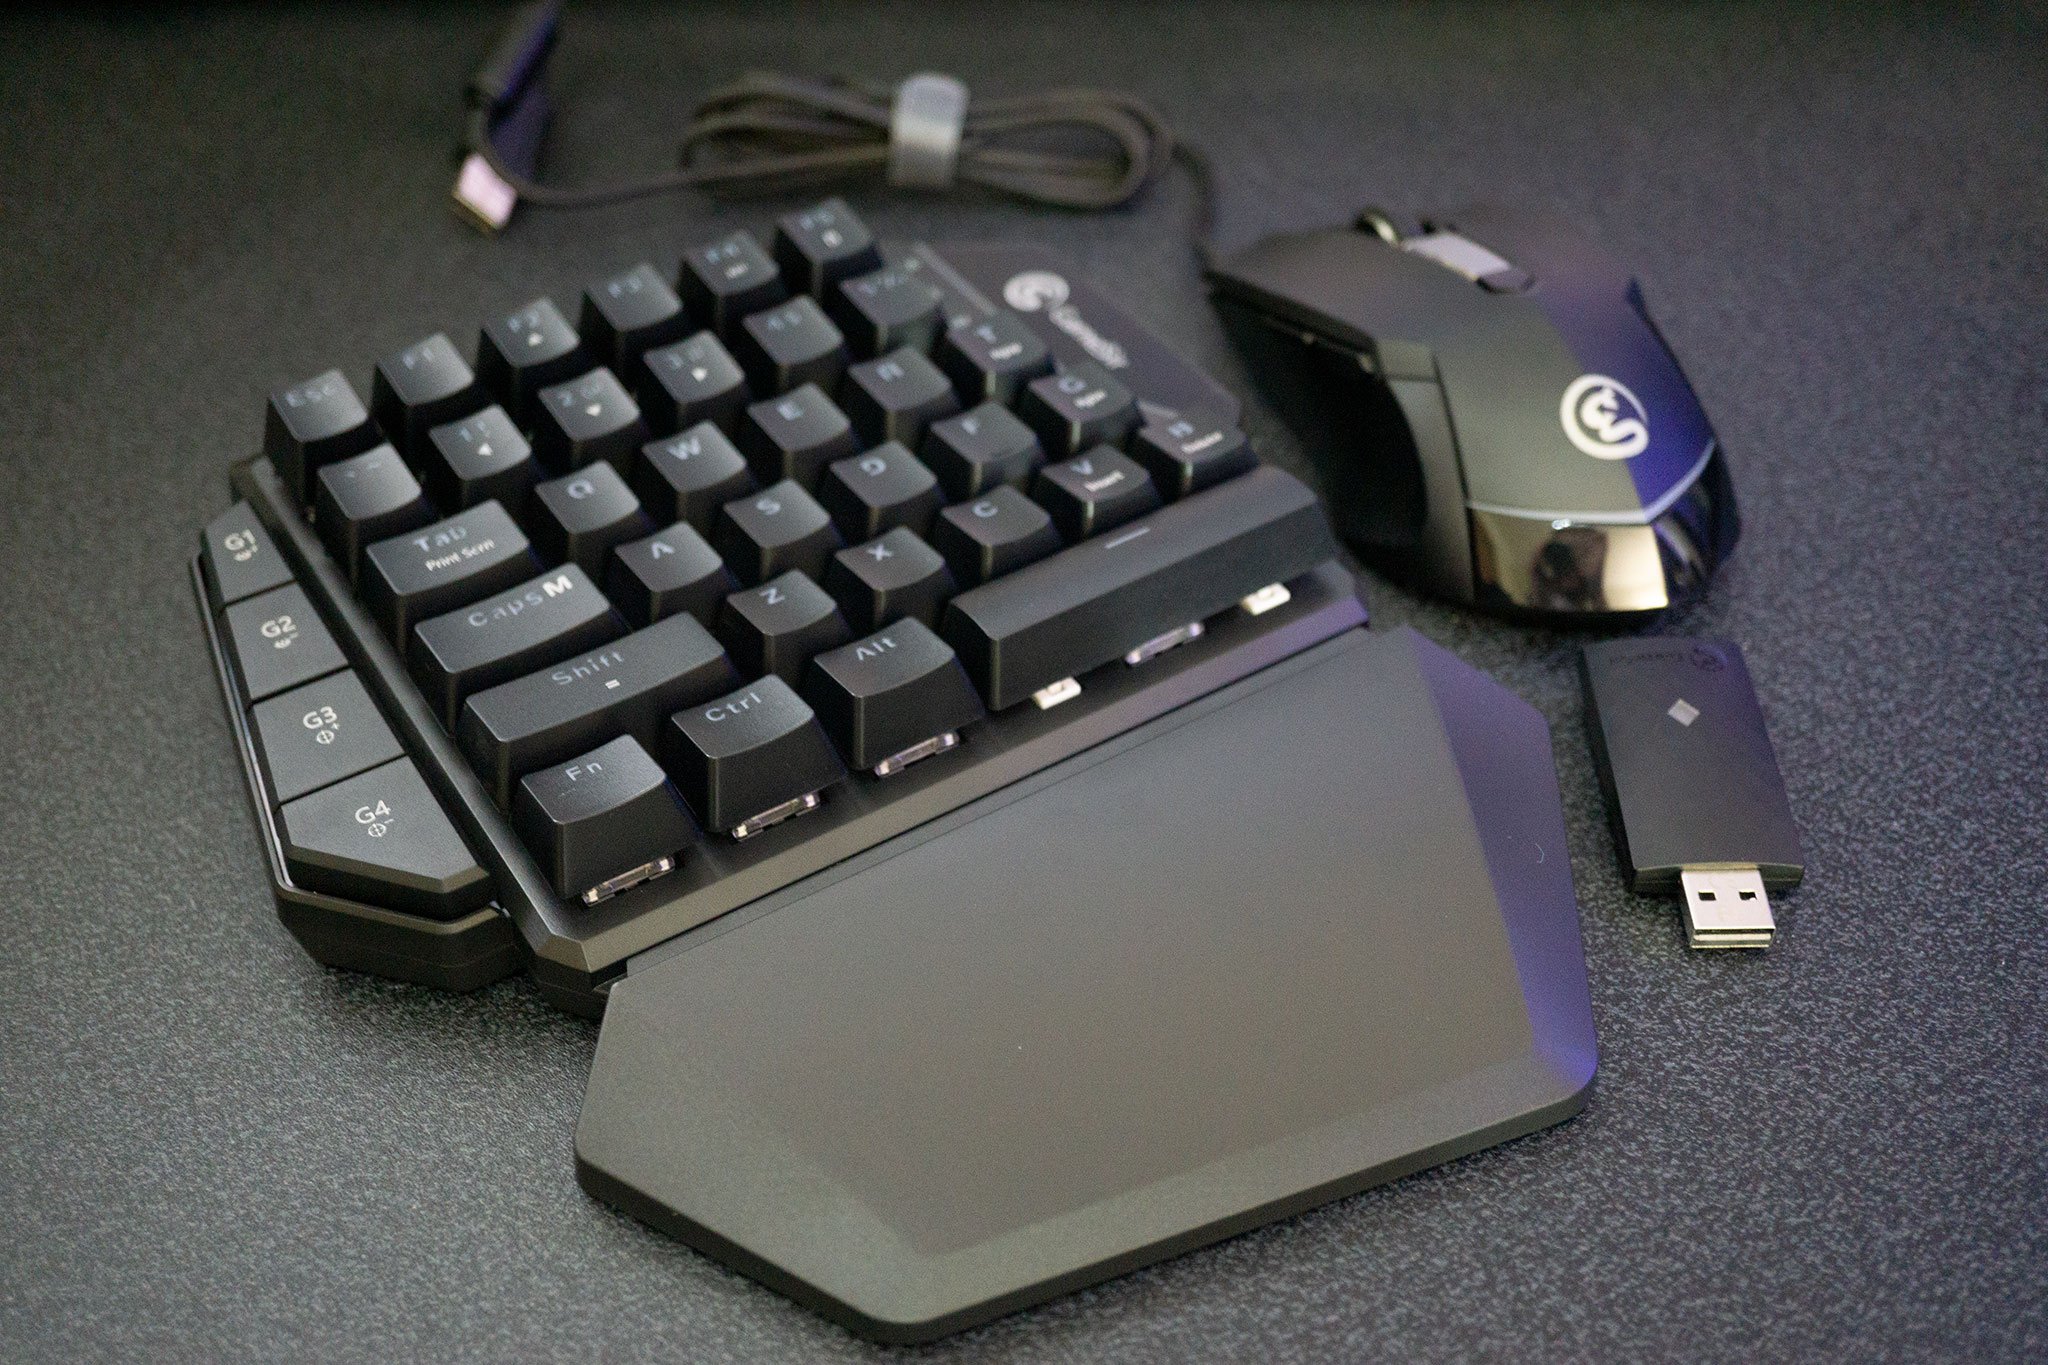 GameSir VX AimSwitch Review: Mini-keyboard replacement for gaming